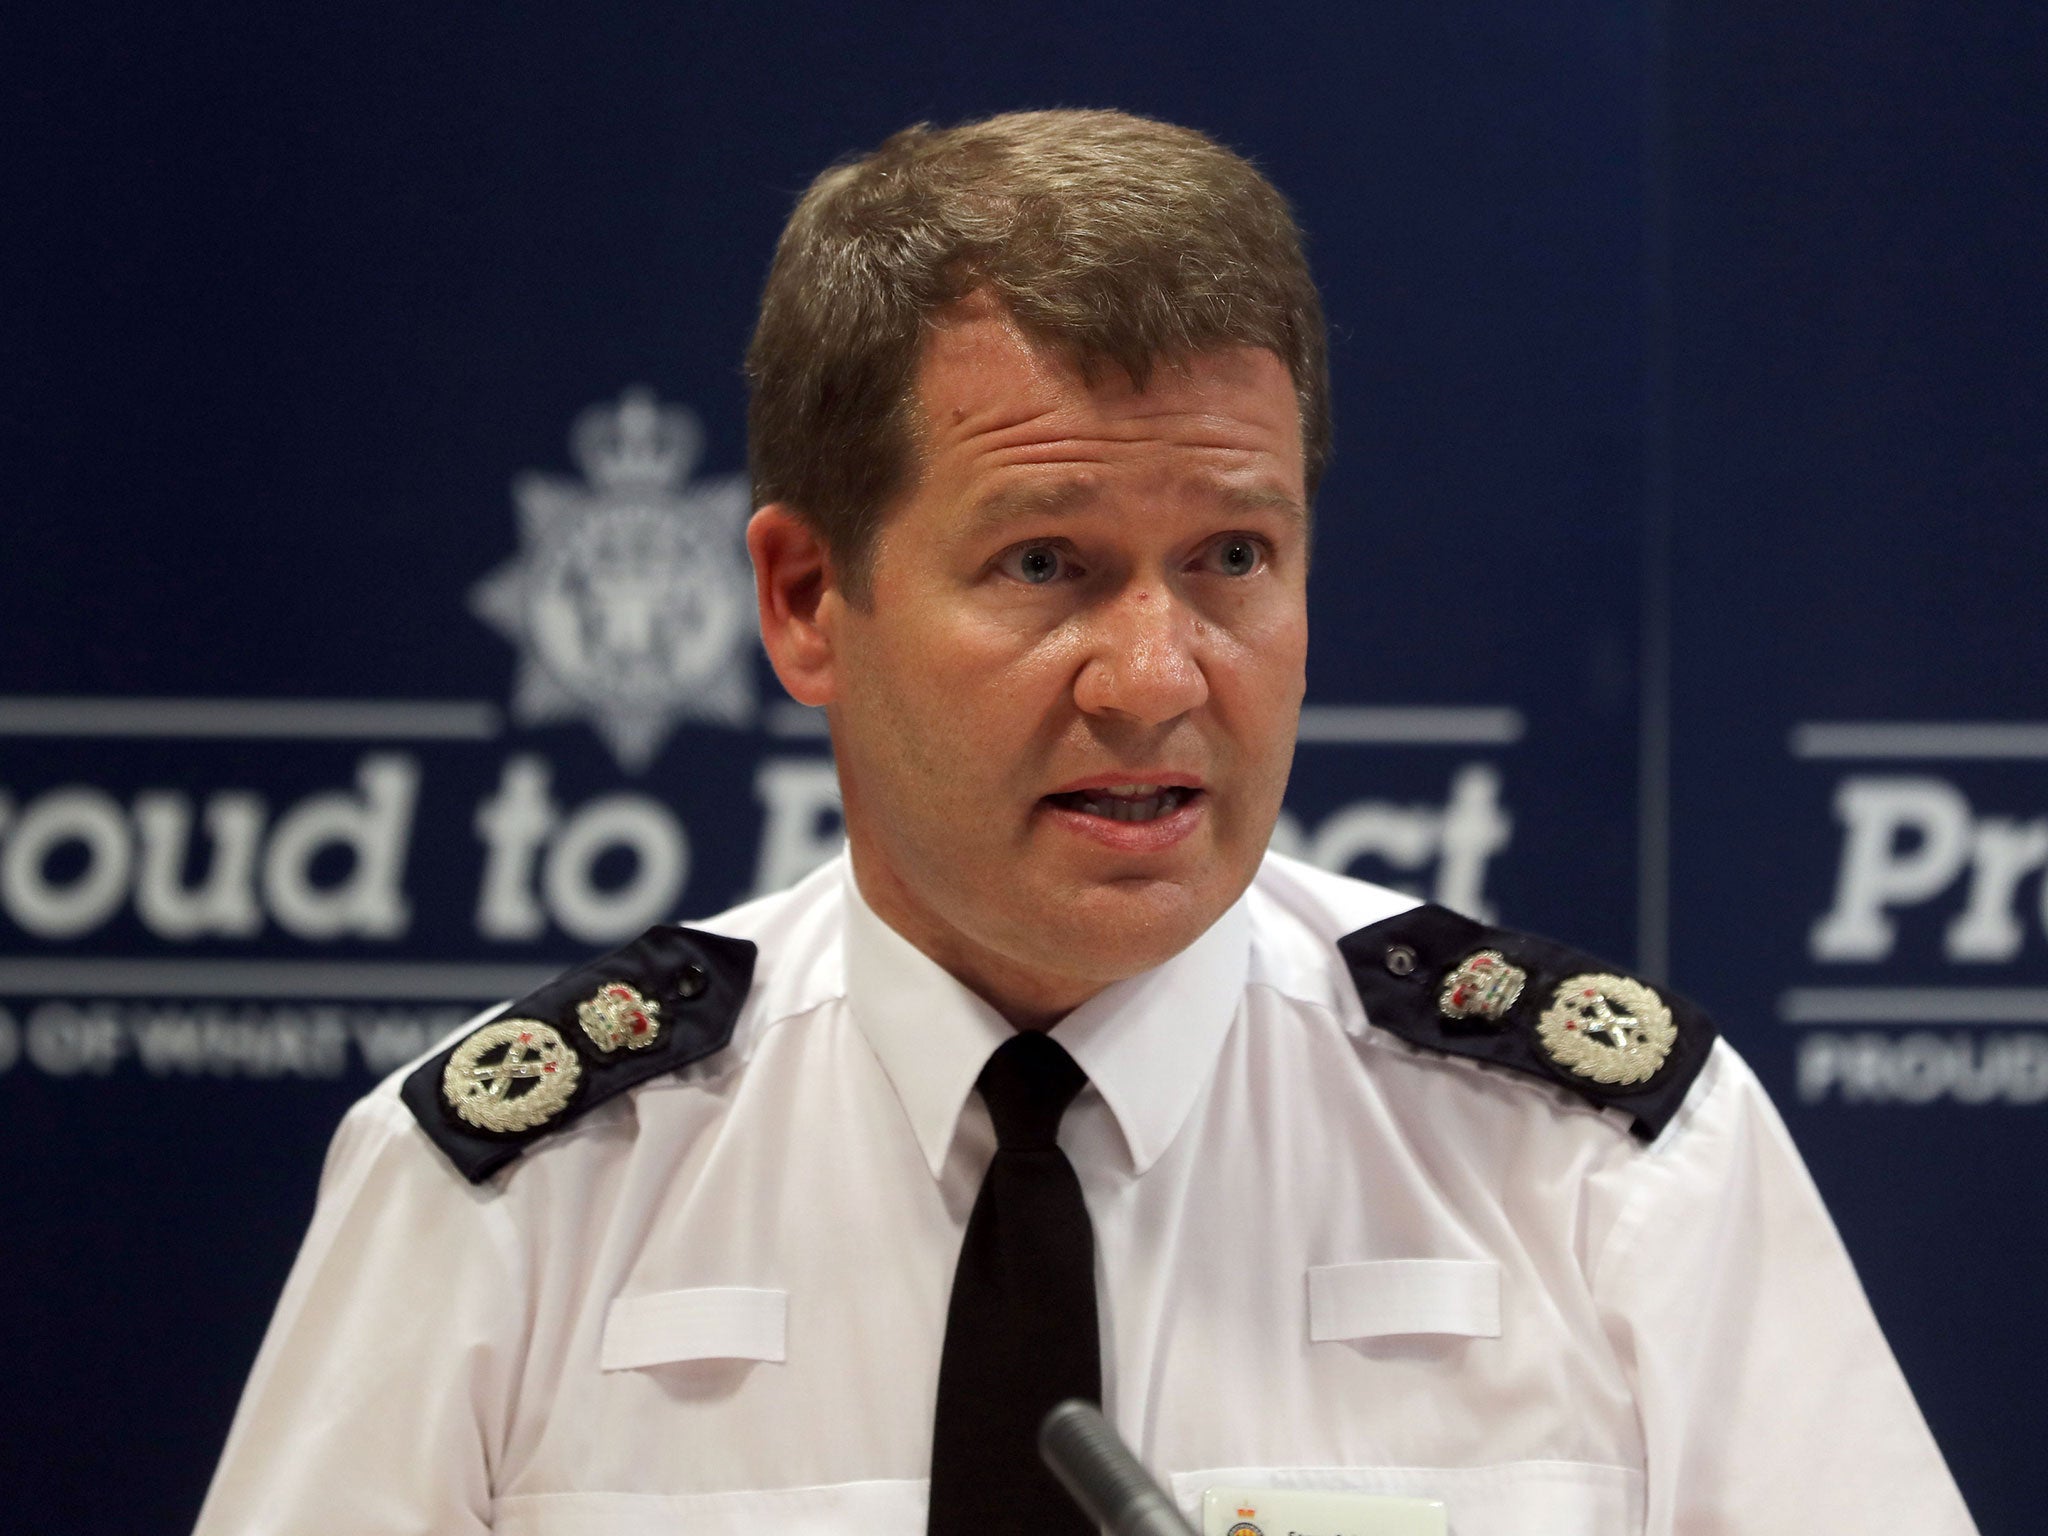 Northumbria Police Chief Constable Steve Ashman during a press conference in Newcastle on 9 August